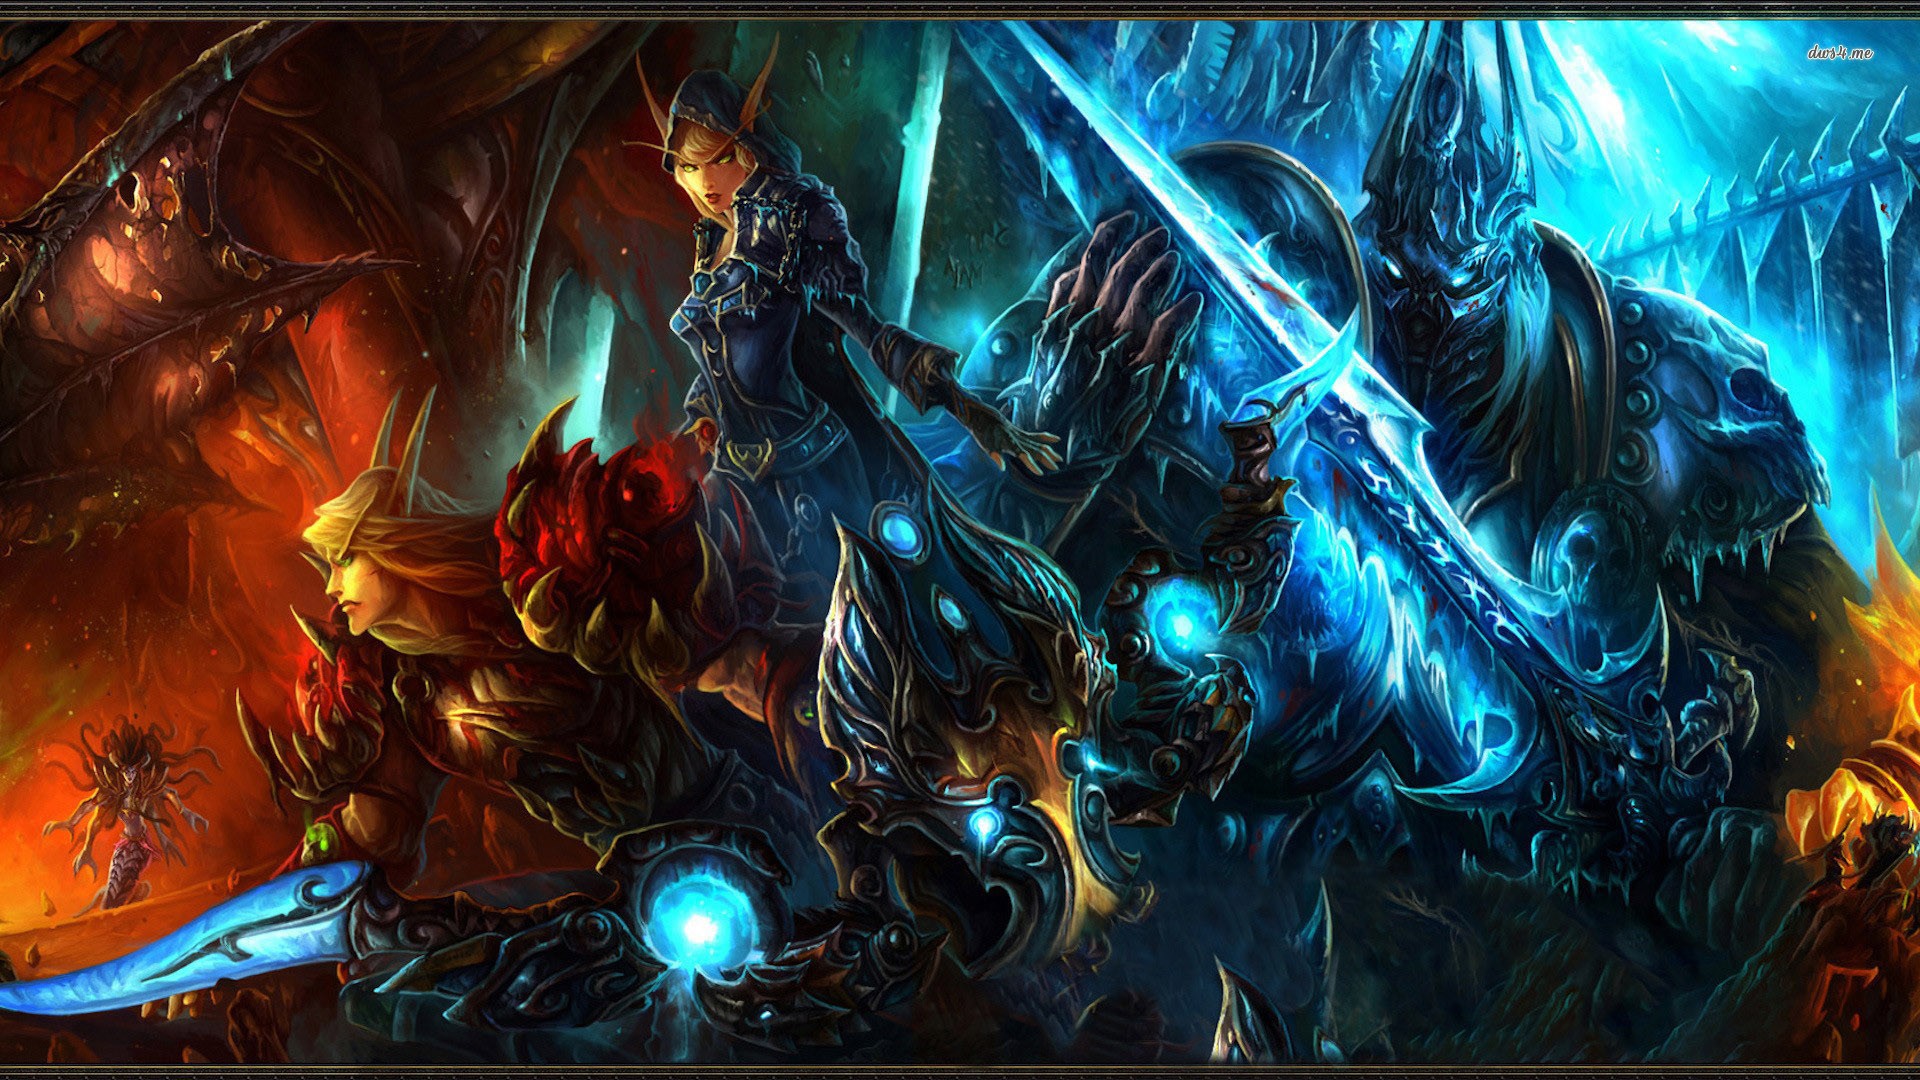 General 1920x1080 Warcraft video games Lich King sword blue red Icecrown Citadel video game characters Blizzard Entertainment